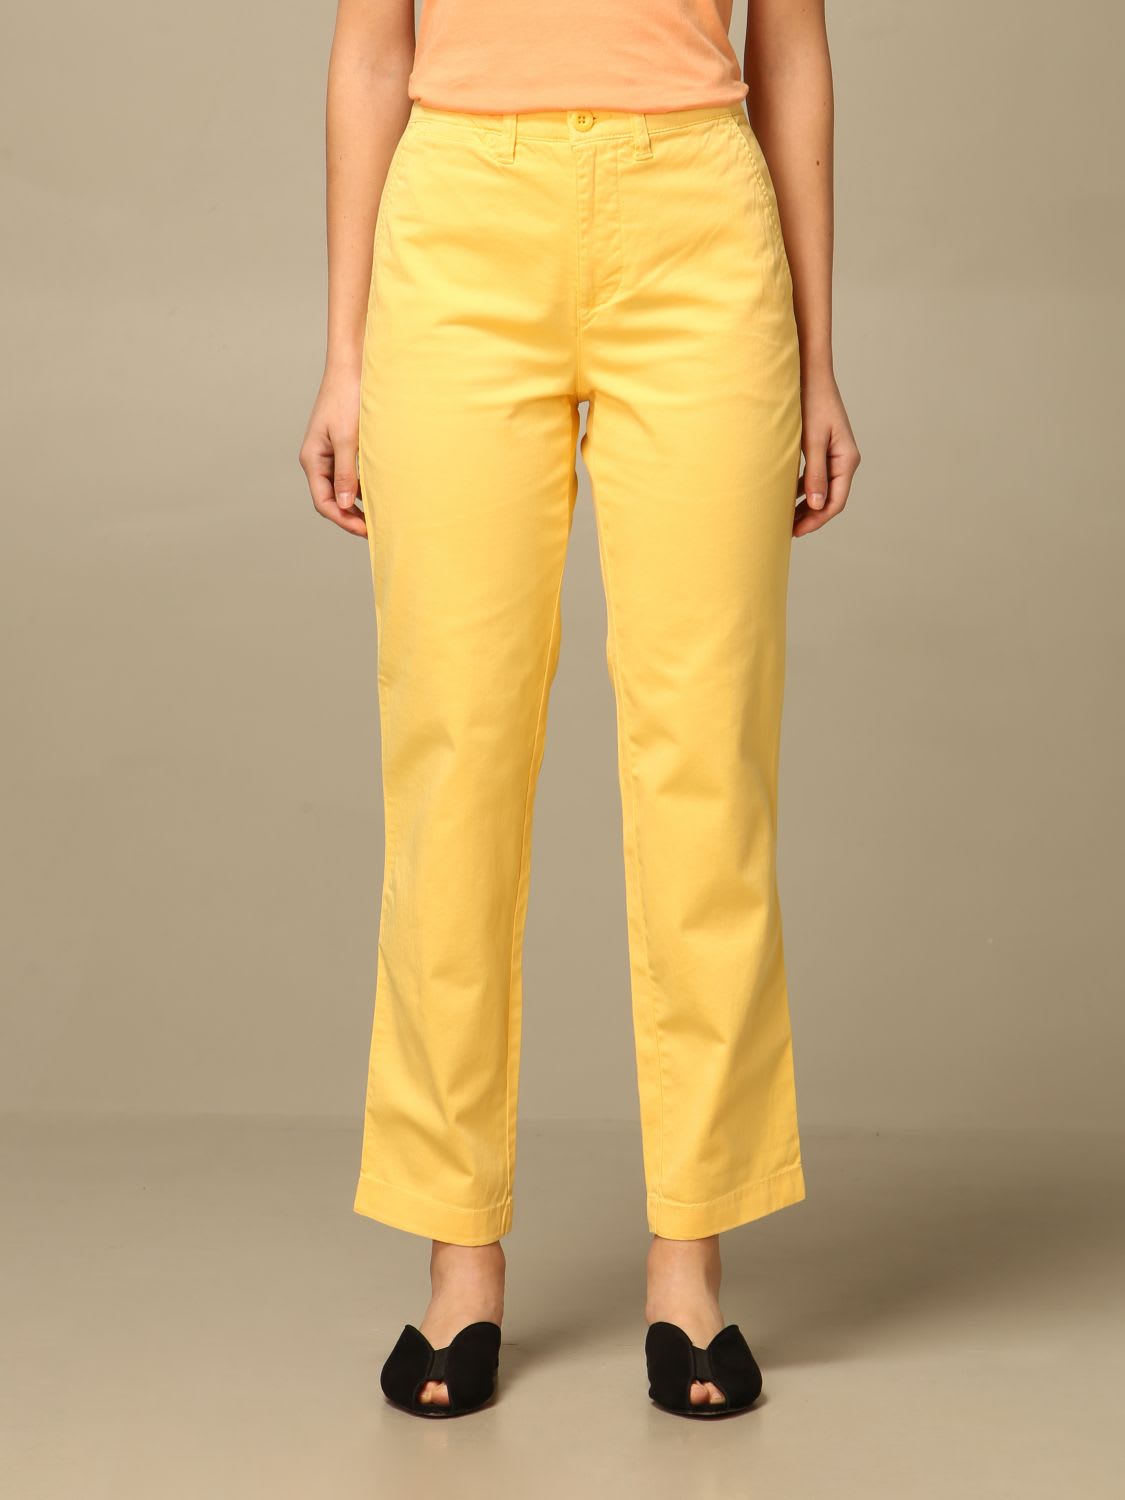 Lauren Ralph Lauren Jeans Lauren Ralph Lauren Cotton Trousers